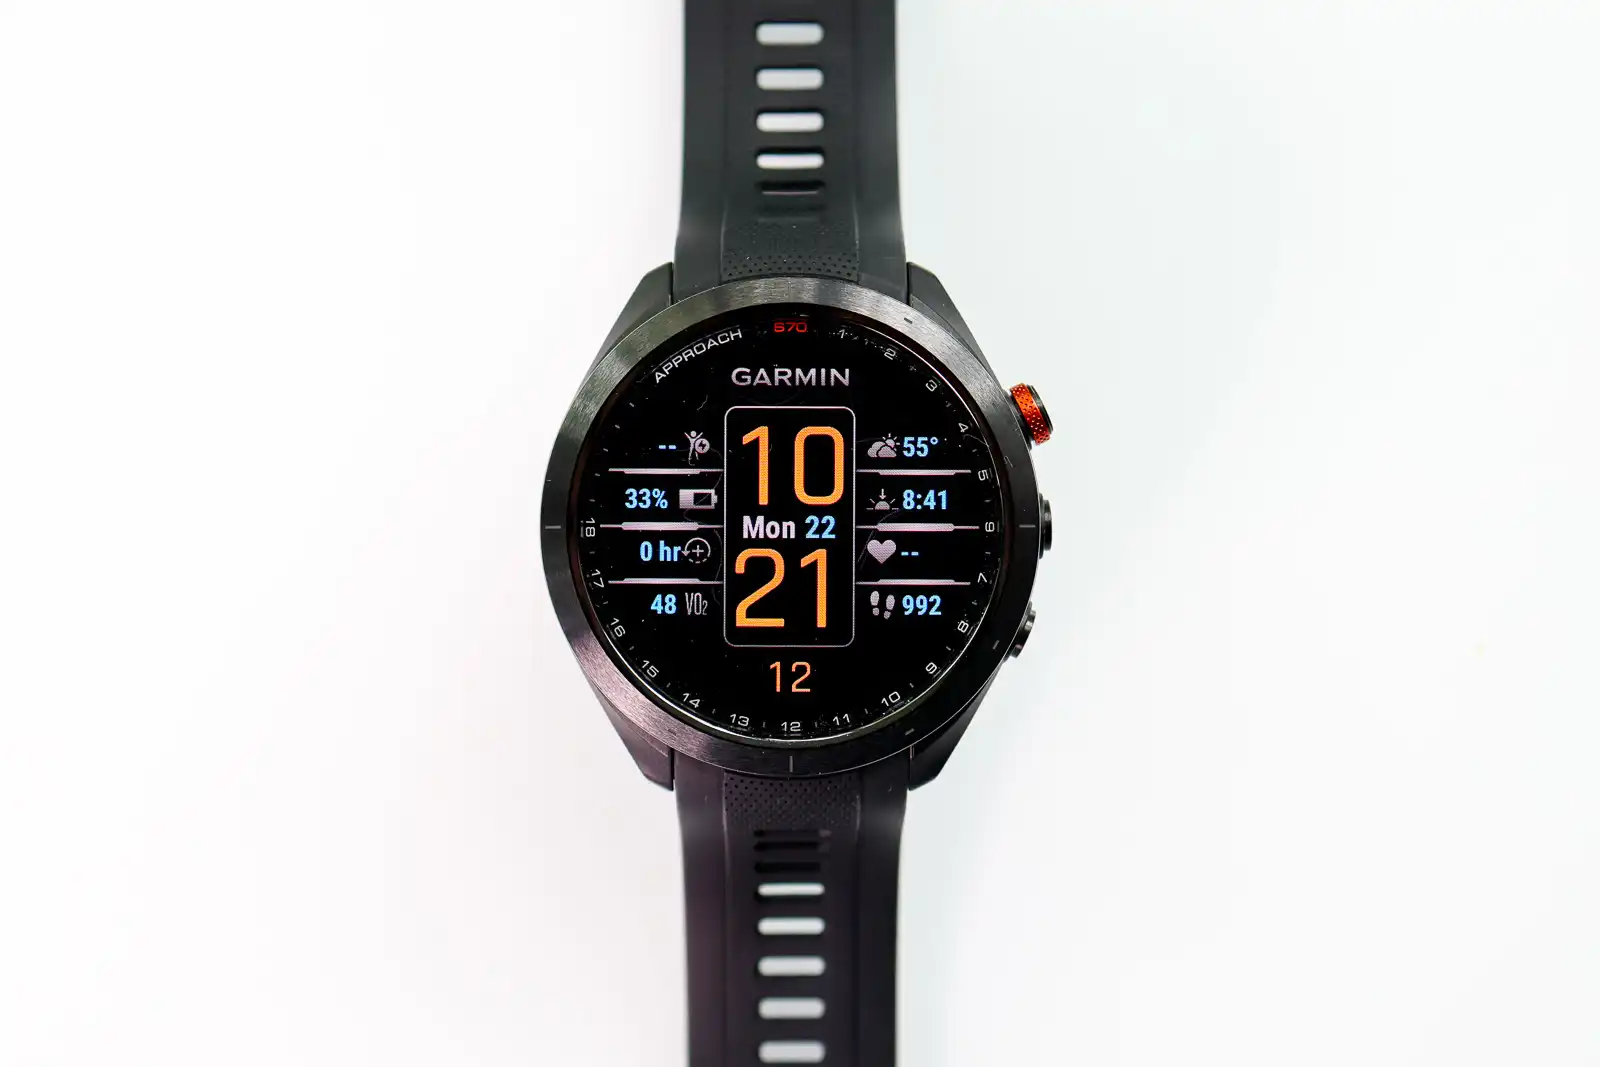 Garmin Approach S70 Review: Is this as Good as It Gets? Maybe...